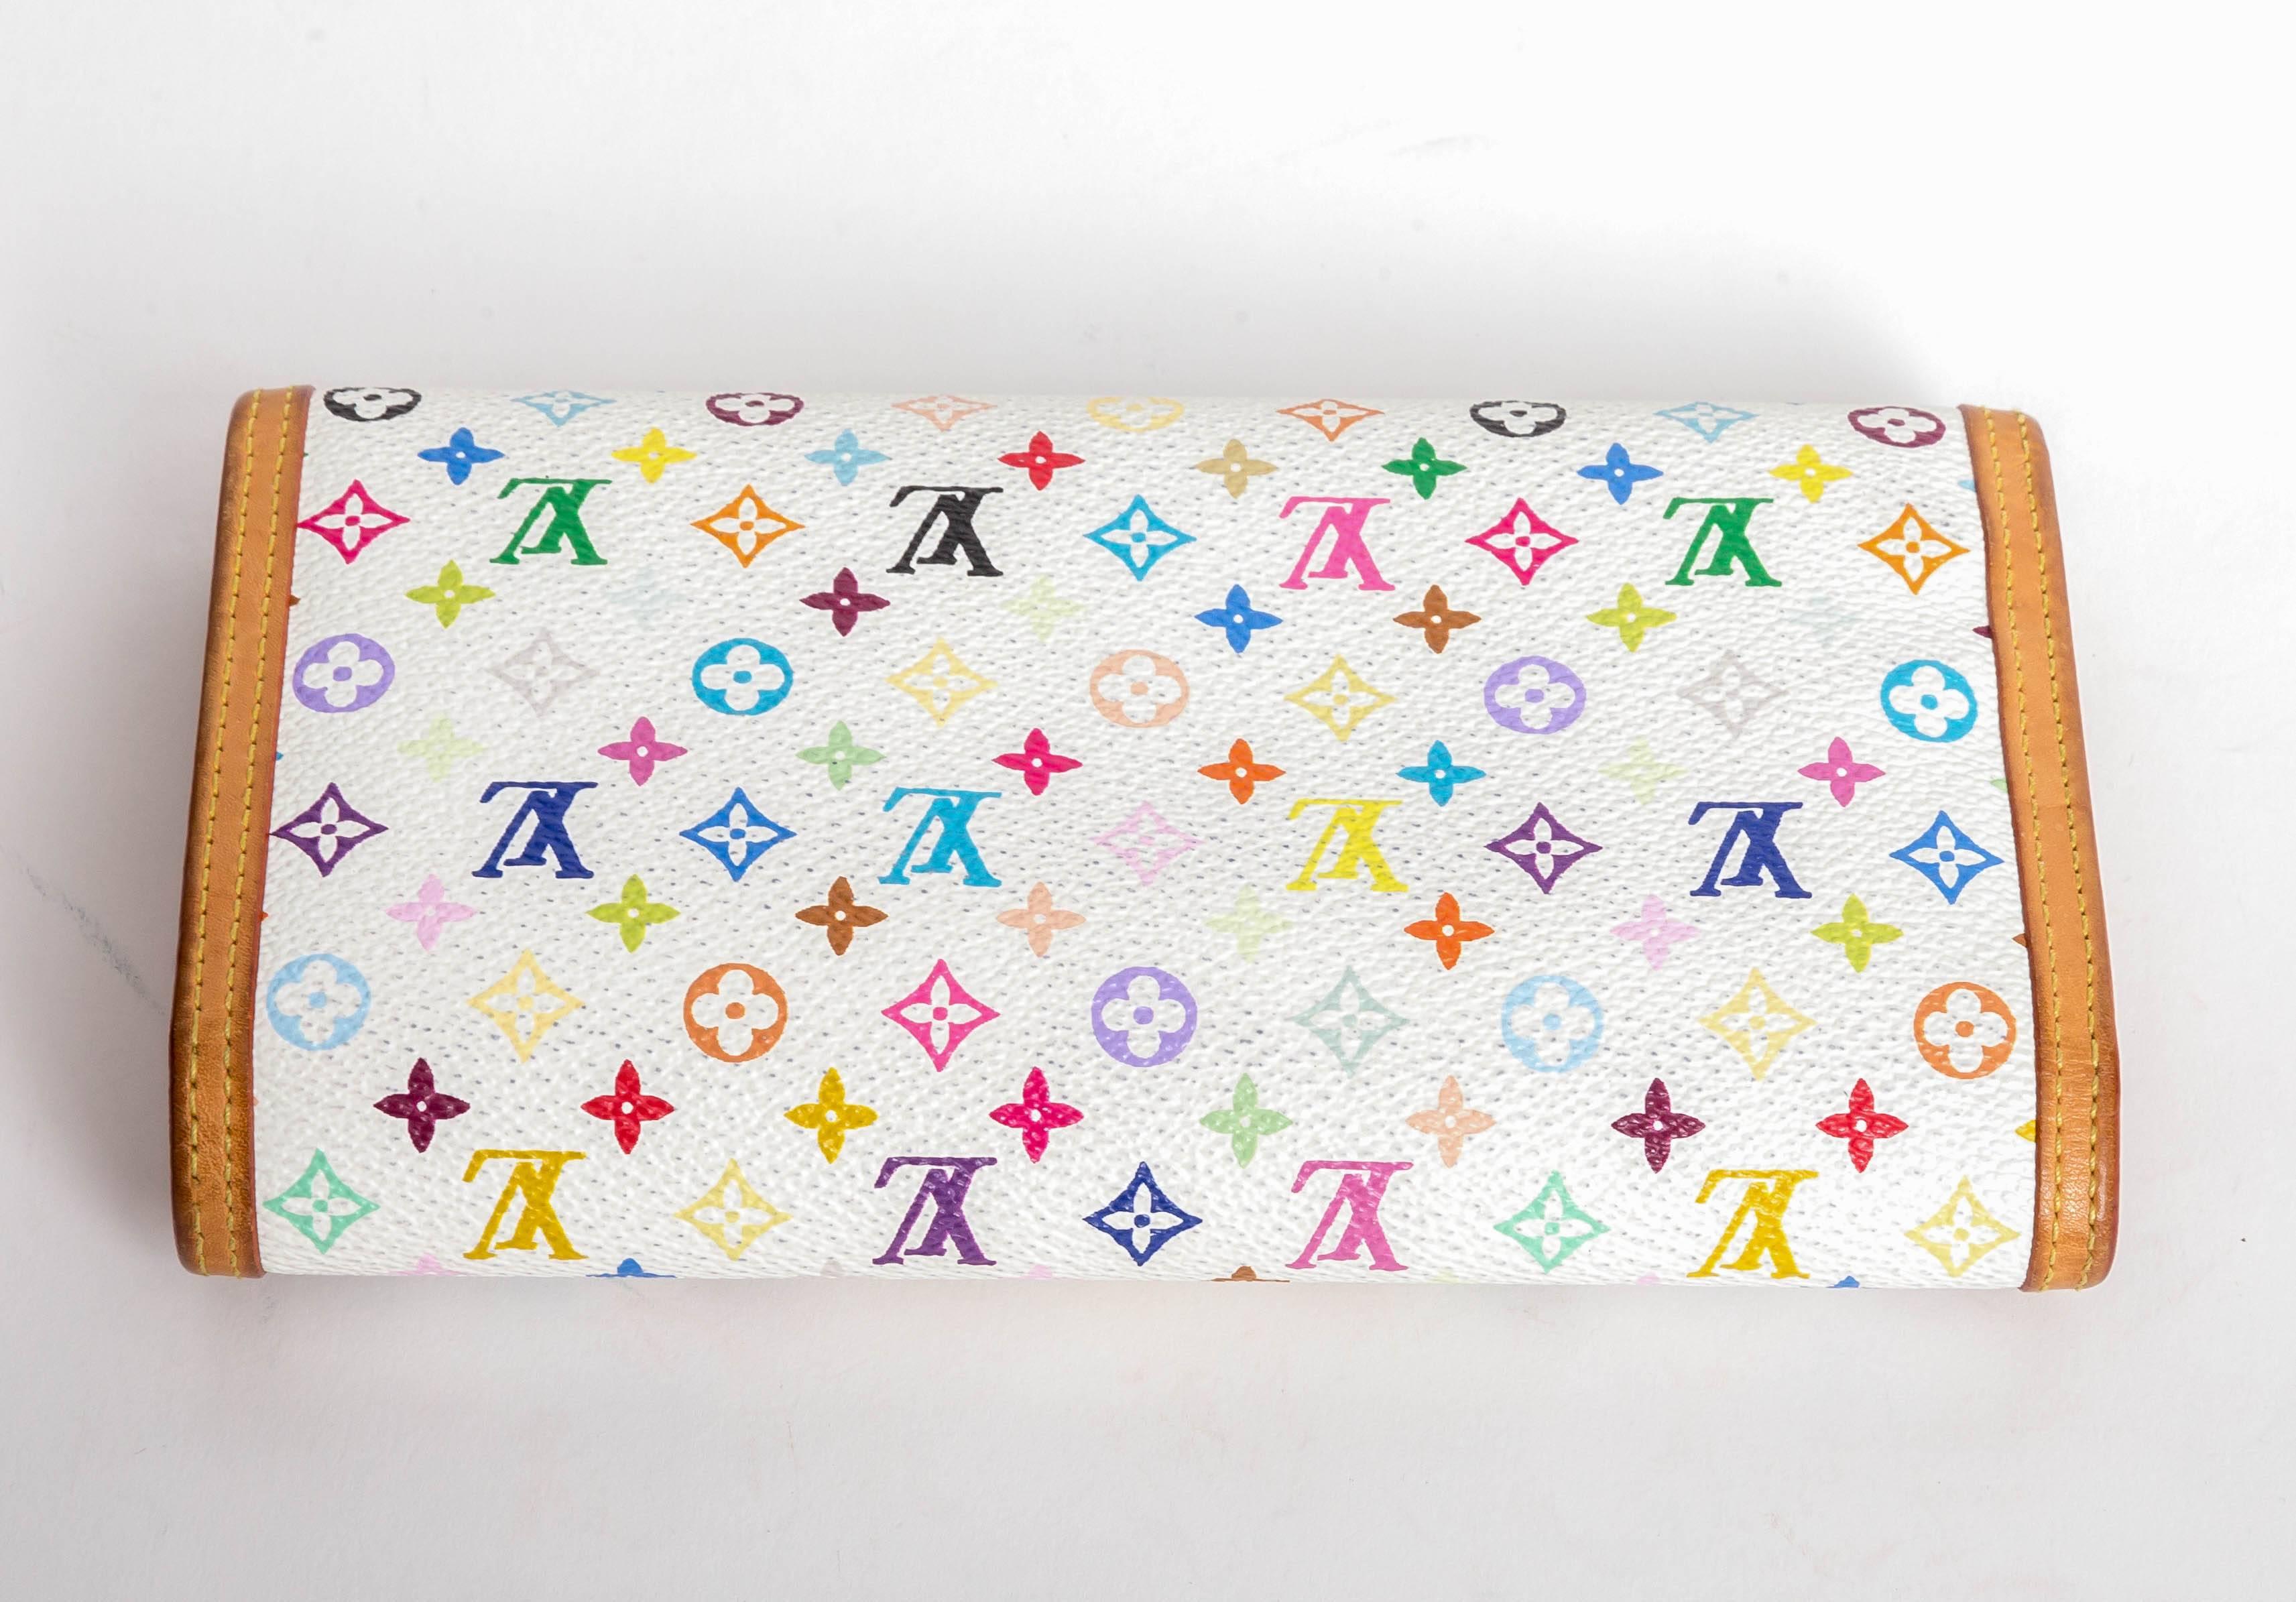 This Louis Vuitton White Monogram Multicolore Porte-Tresor International Wallet is the most elegant way to organize your essentials like your bills, checkbook, credit cards and plenty of coins. This delightful piece will always be a timeless